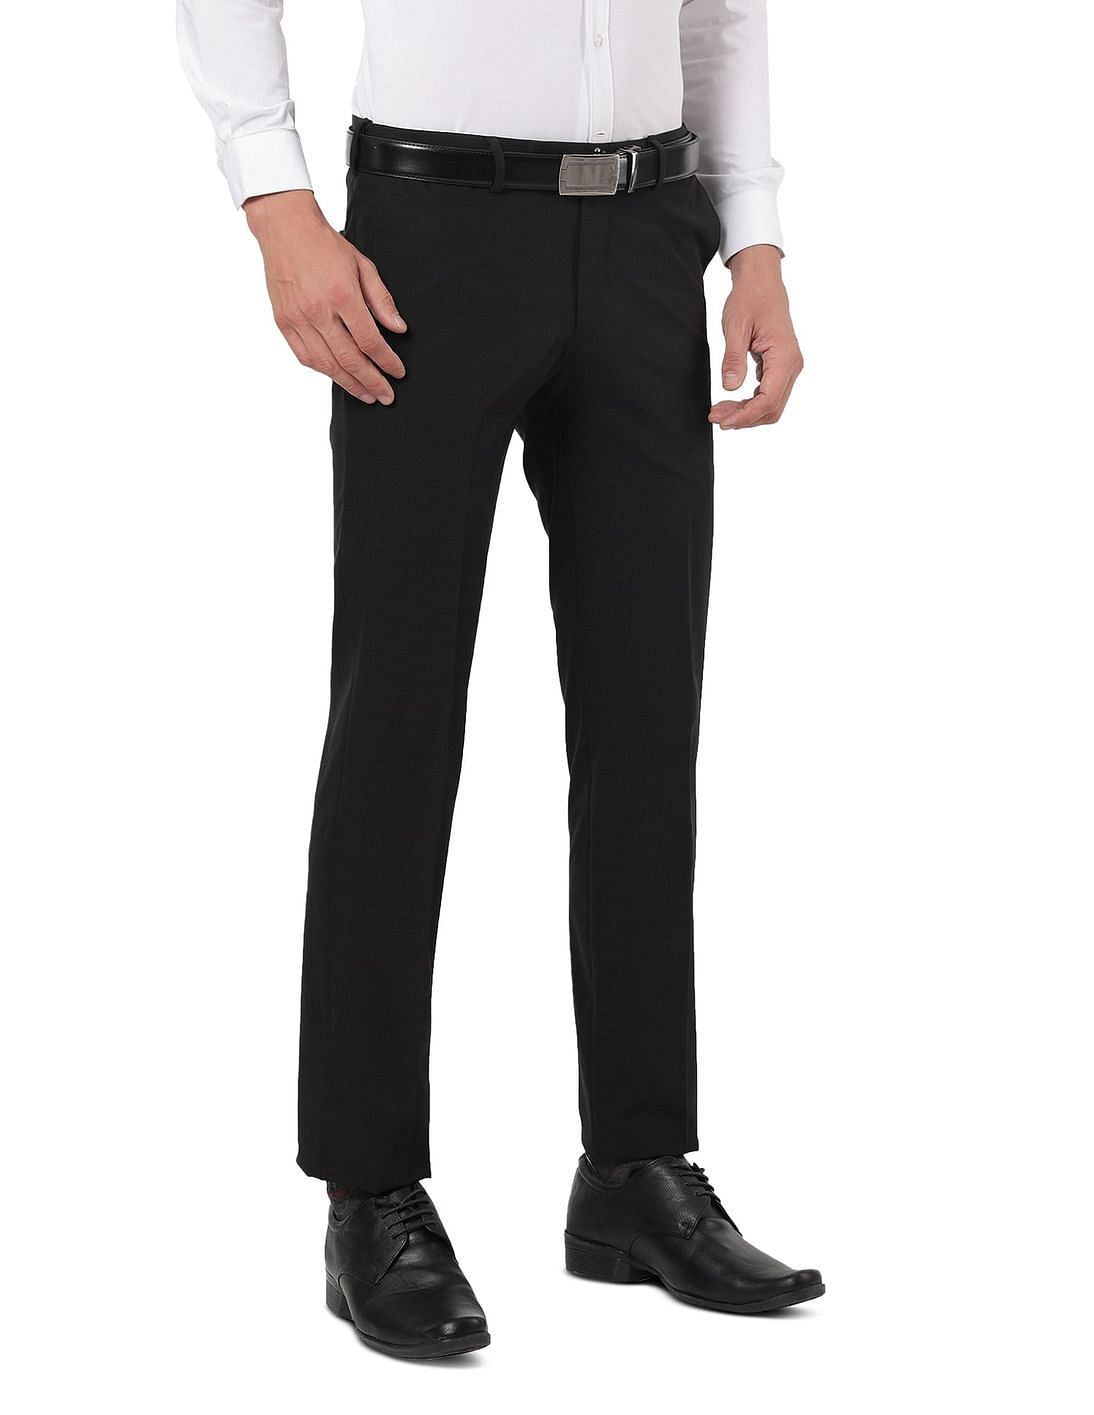 Buy IndiWeaves Mens 3 Rayon Formal Trousers and 3 LowerTrack Pants Combo  Offer Pack of 6BlueGrayBrownBlueGreyGreySize 38 Lower Free  Size Online  3999 from ShopClues